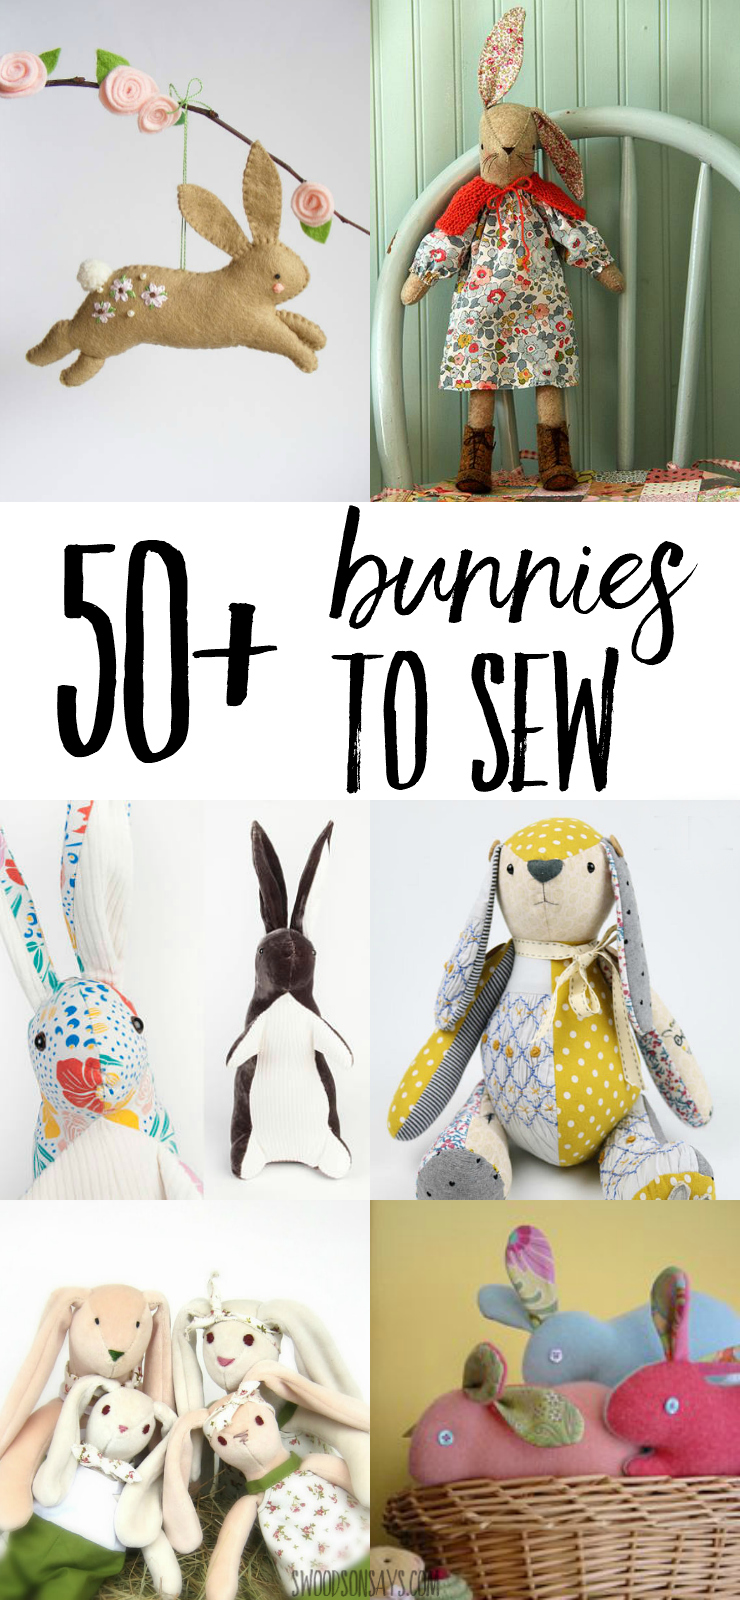 Check out over 50 bunny sewing patterns to sew the sweetest stuffed animals. Perfect Easter sewing projects, there are sock bunnies, felt bunnies, fat bunnies, skinny bunnies, bunny families, and pocket bunnies. Over 30 free bunny sewing patterns too!